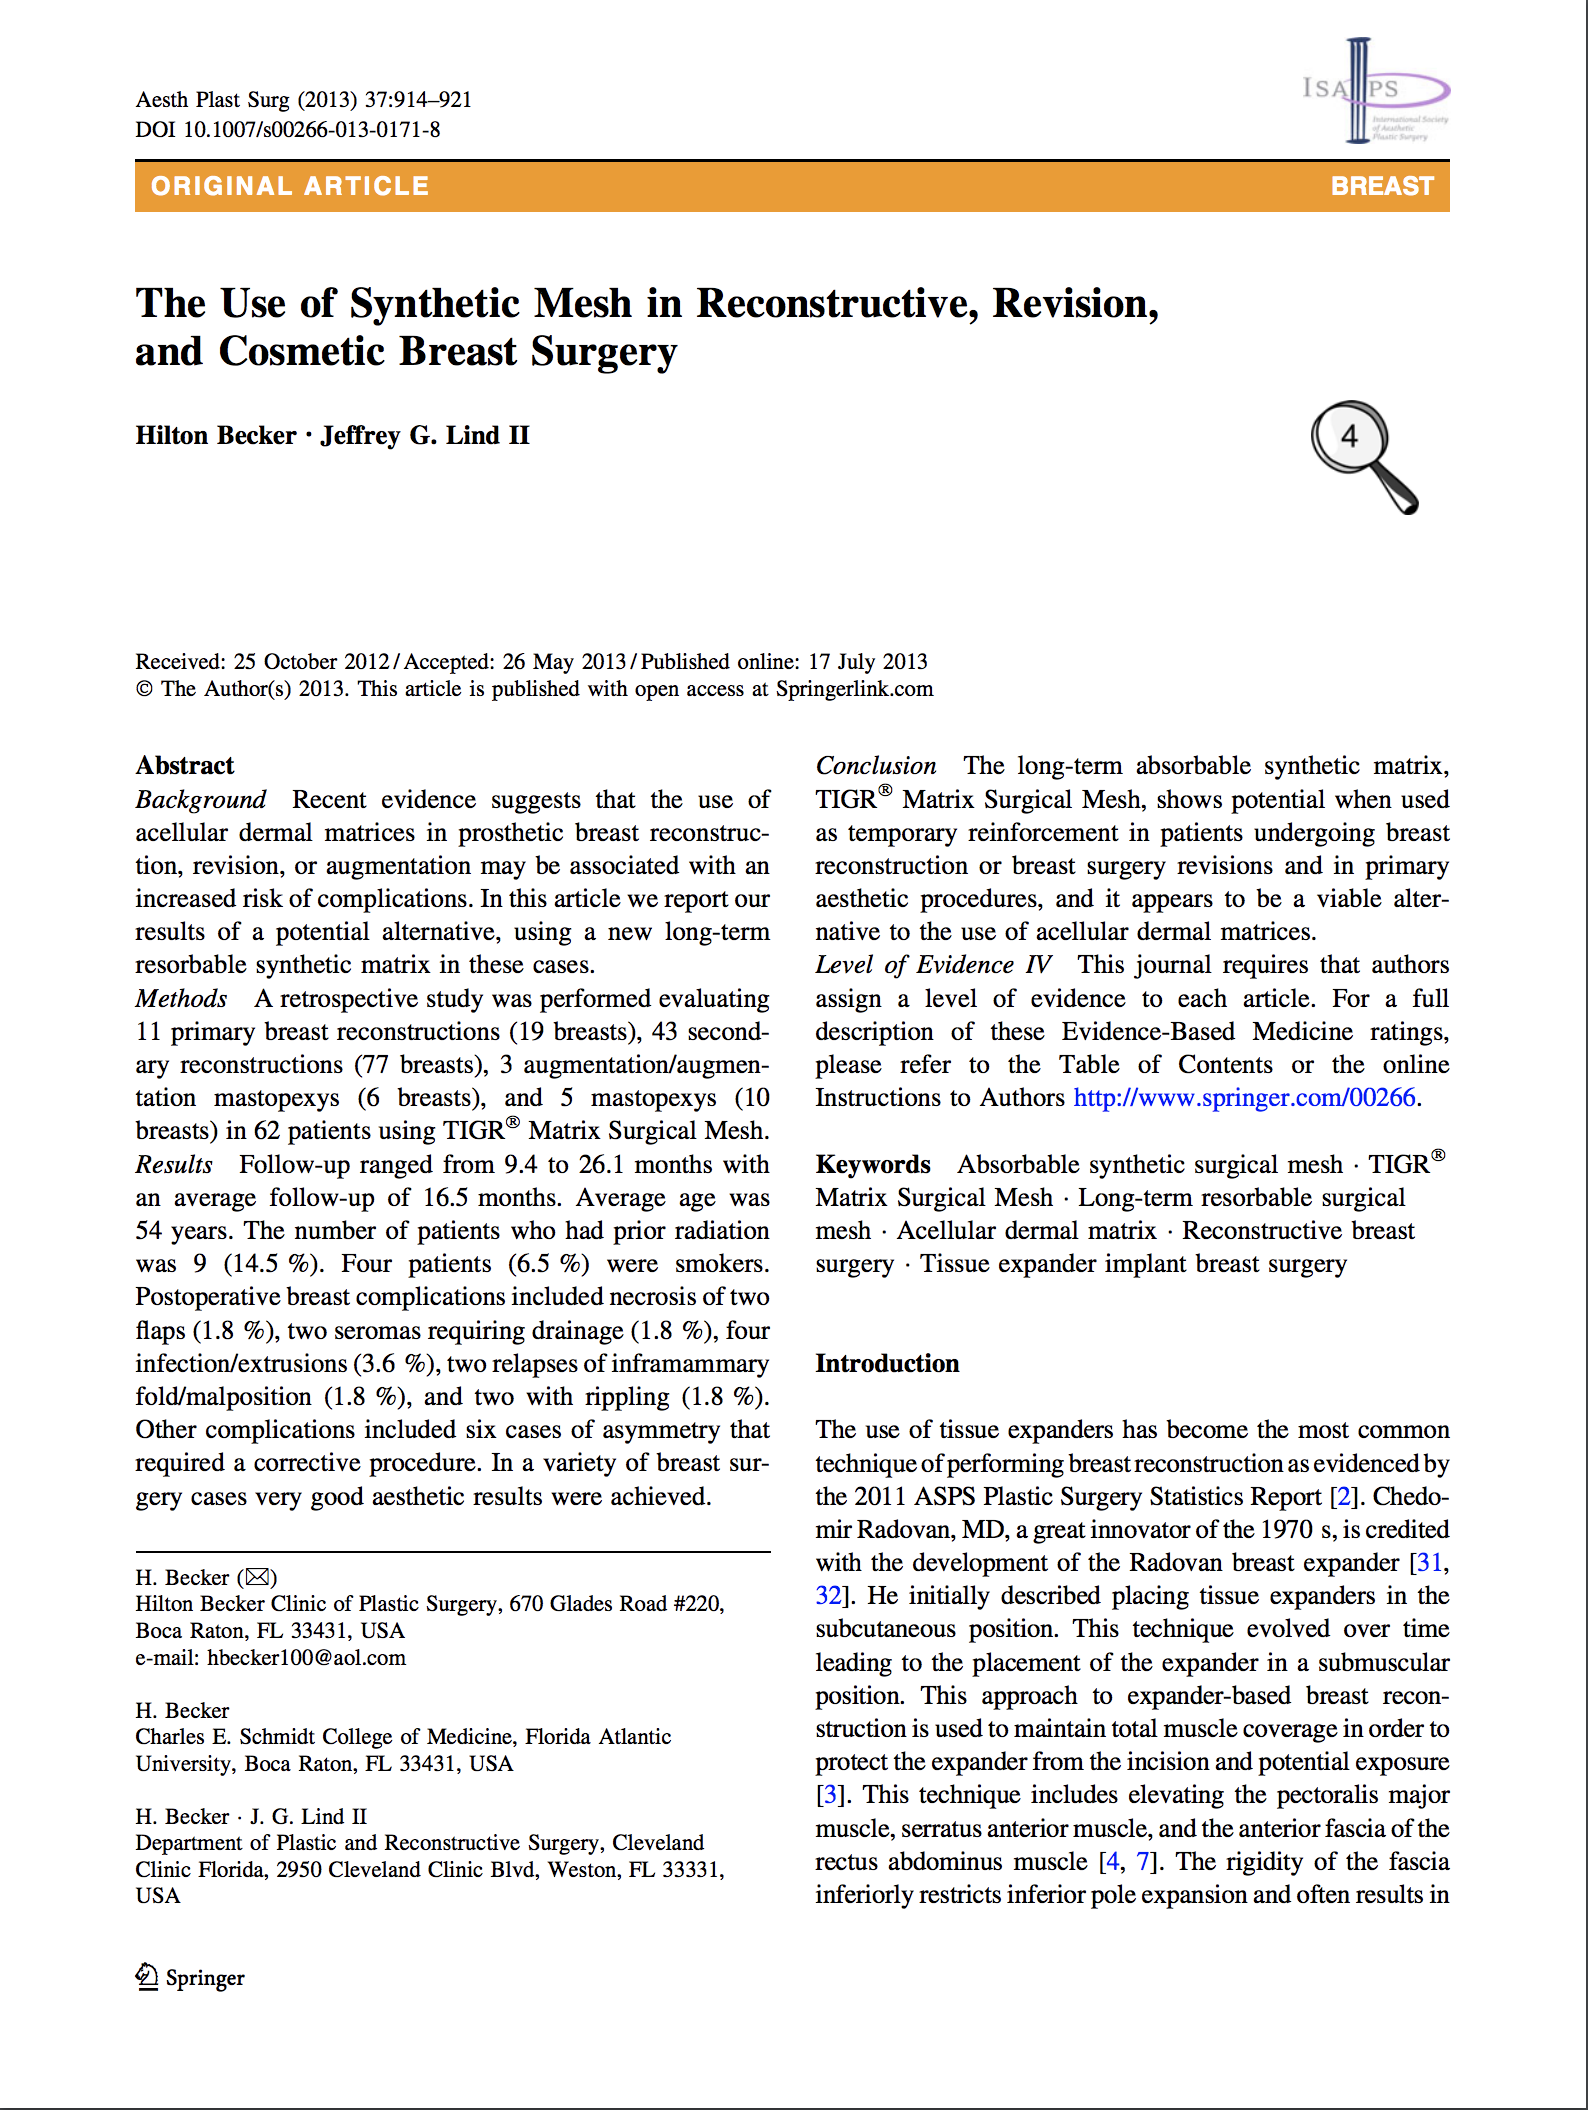 The Use of Synthetic Mesh in Reconstructive, Revision,
and Cosmetic Breast Surgery